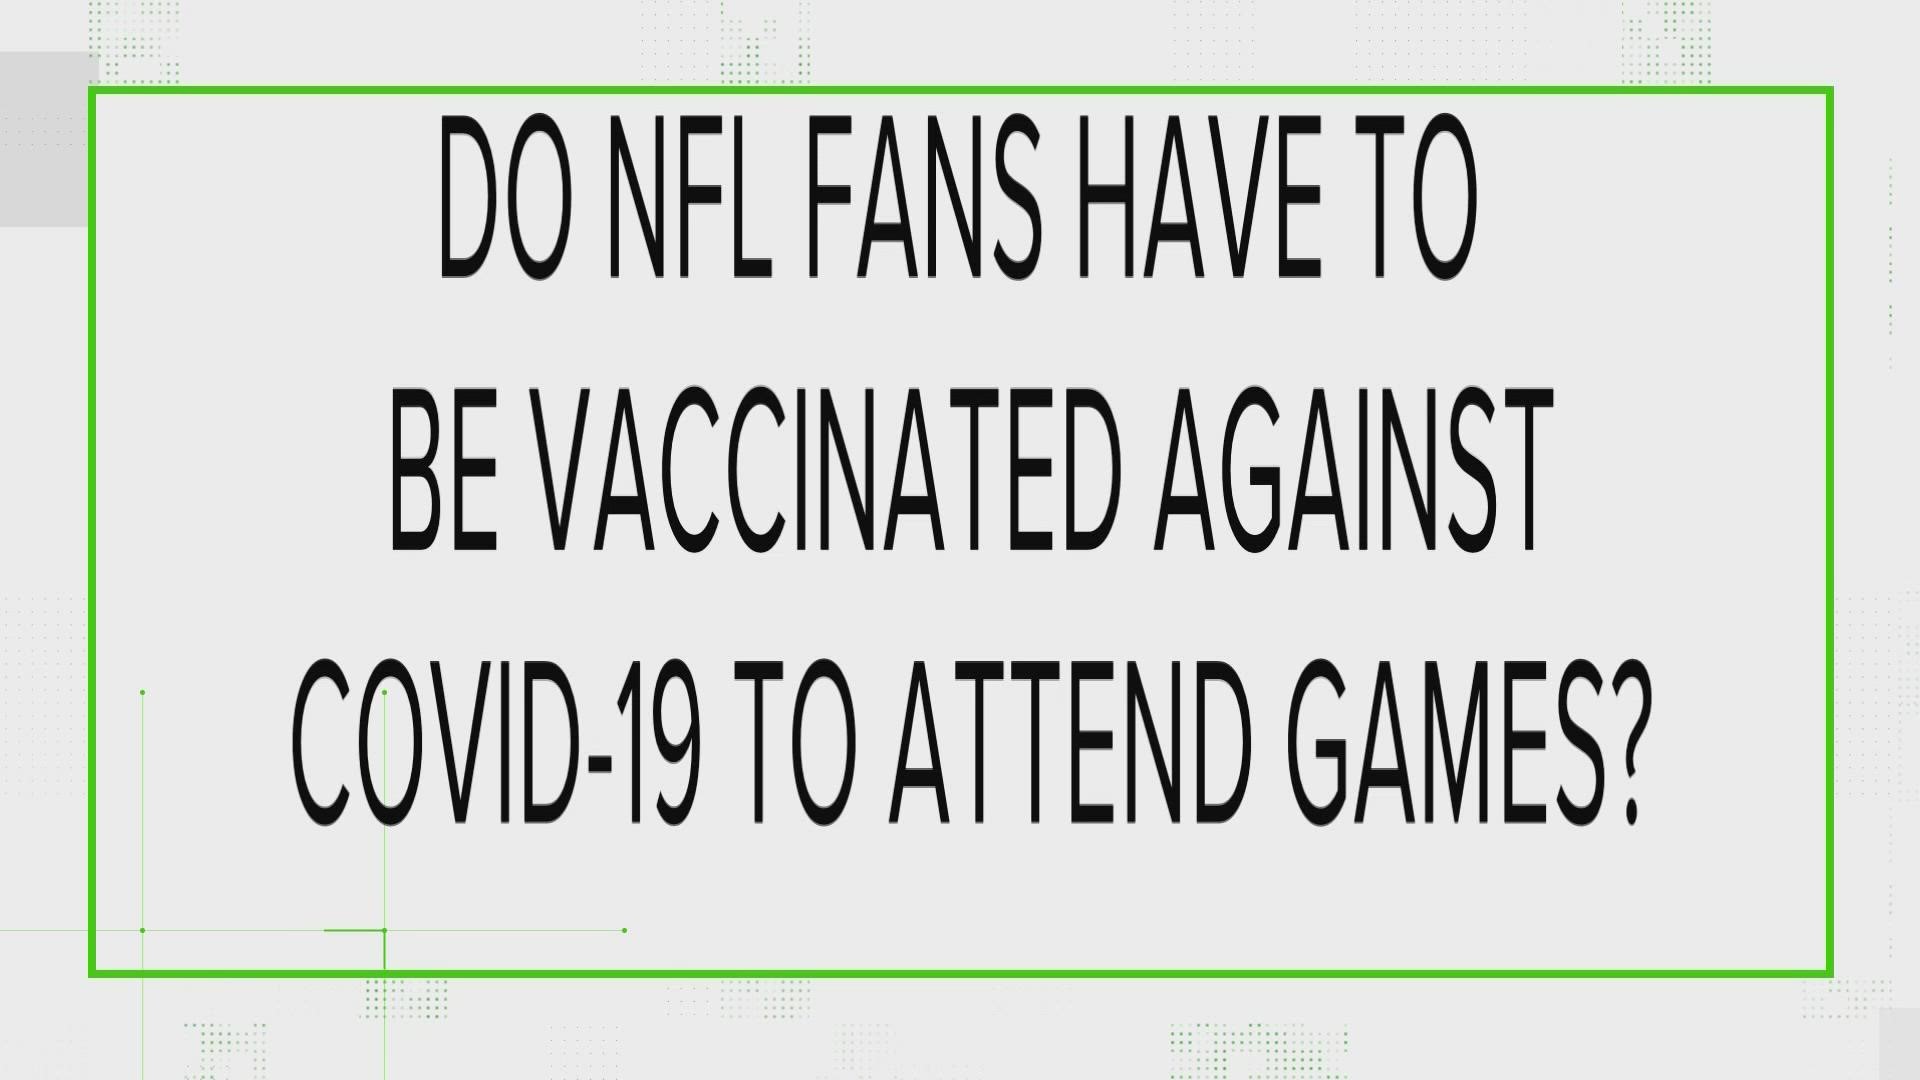 The Carolina Panthers and Bank of America Stadium are not requiring fans to be vaccinated at this time.